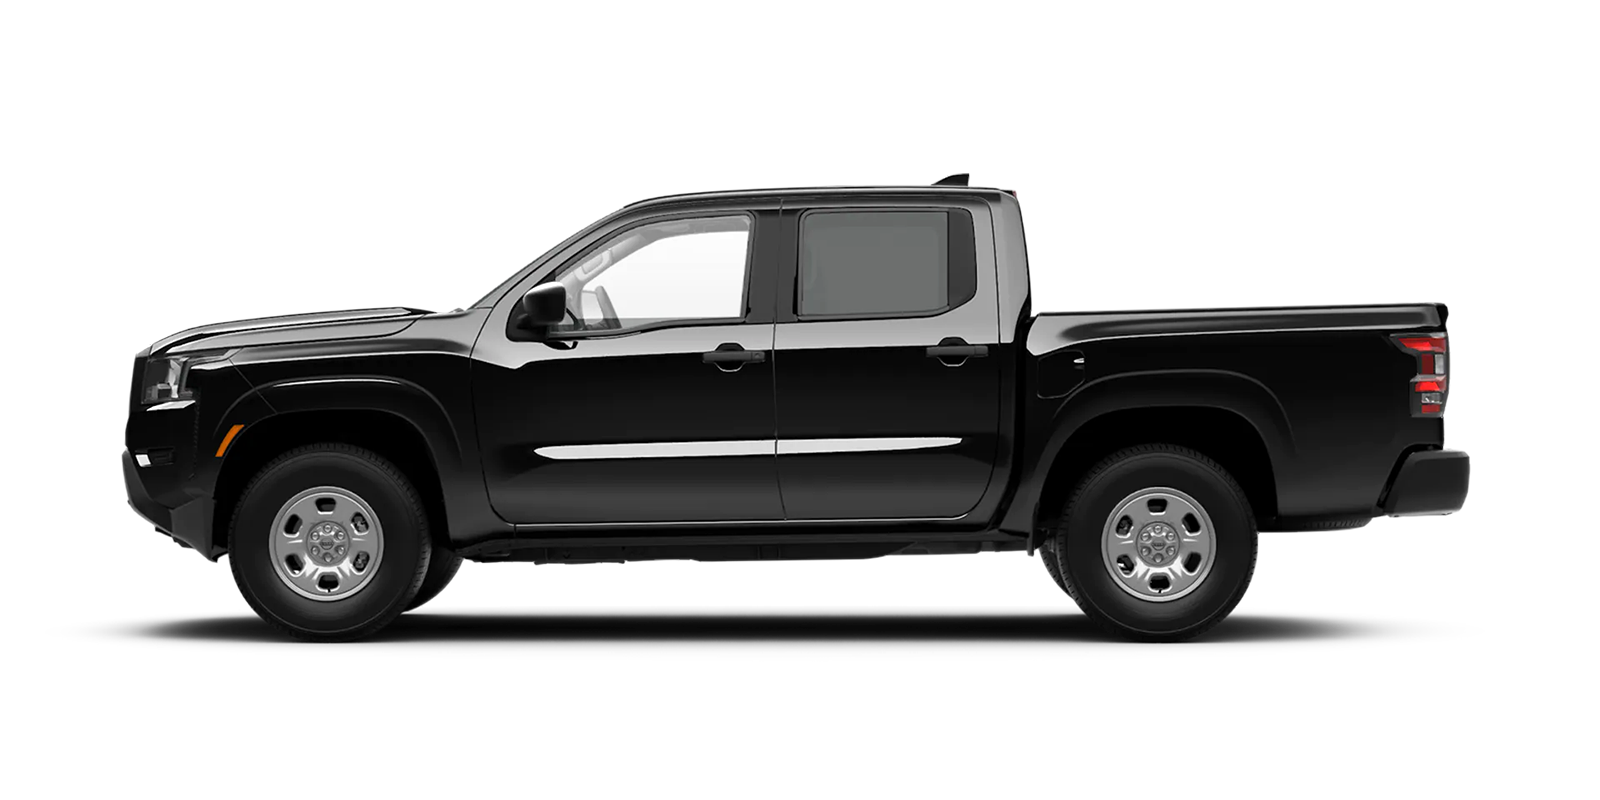 2022 Frontier Crew Cab S 4x4 in Super Black | Rusty Wallace Nissan in Knoxville TN